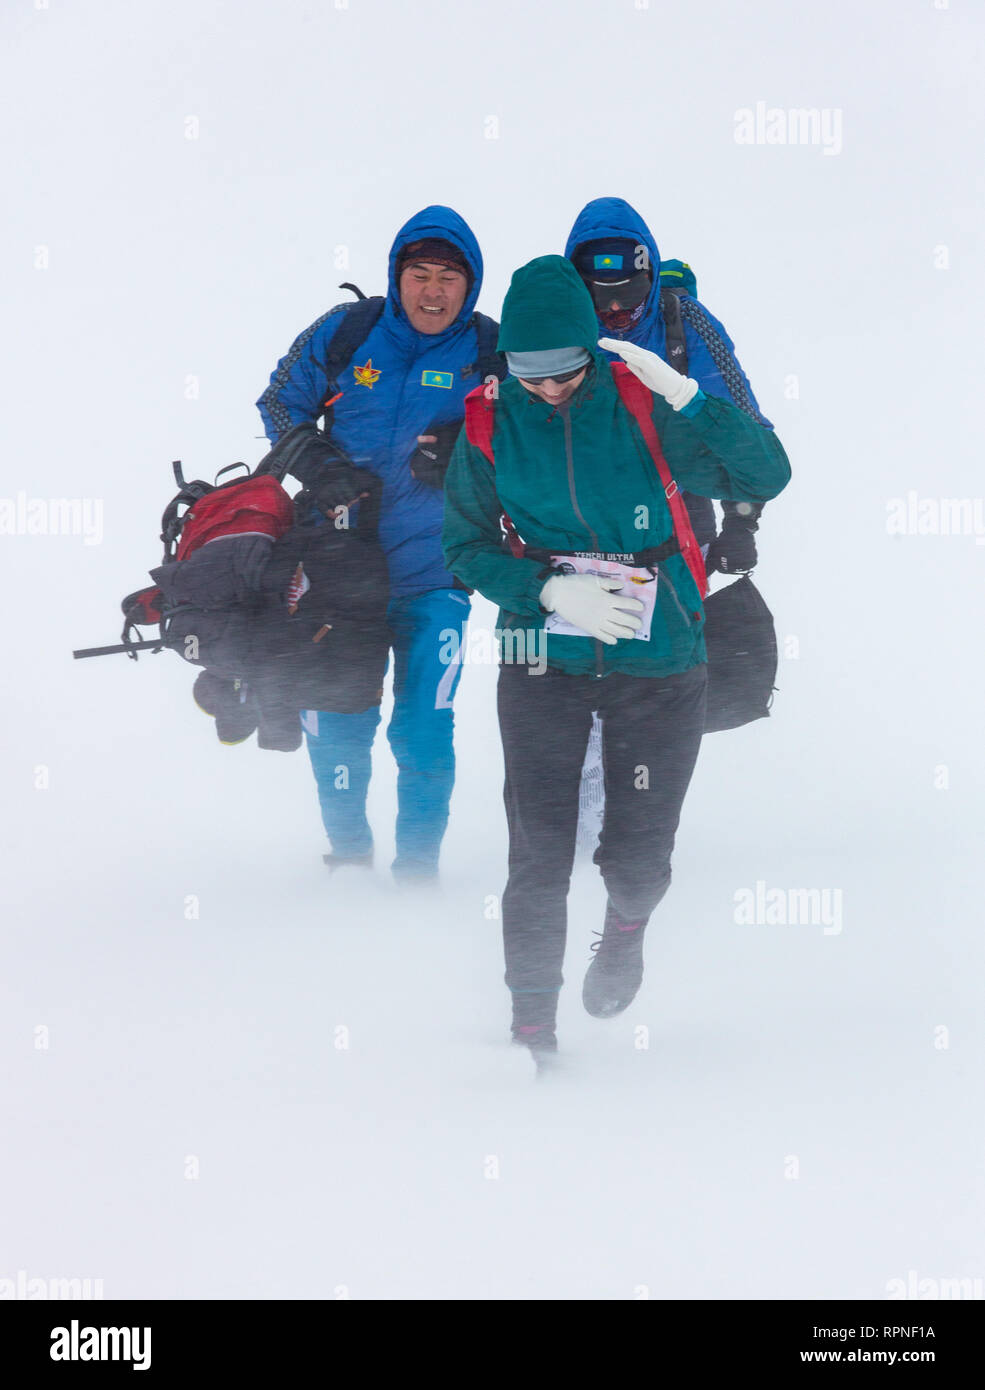 ALMATY KAZAKHSTAN - FEBRUARY 03 2019: Unidentified people walk through a snowstorm during the AlpineRais competition in the mountains during the Stock Photo